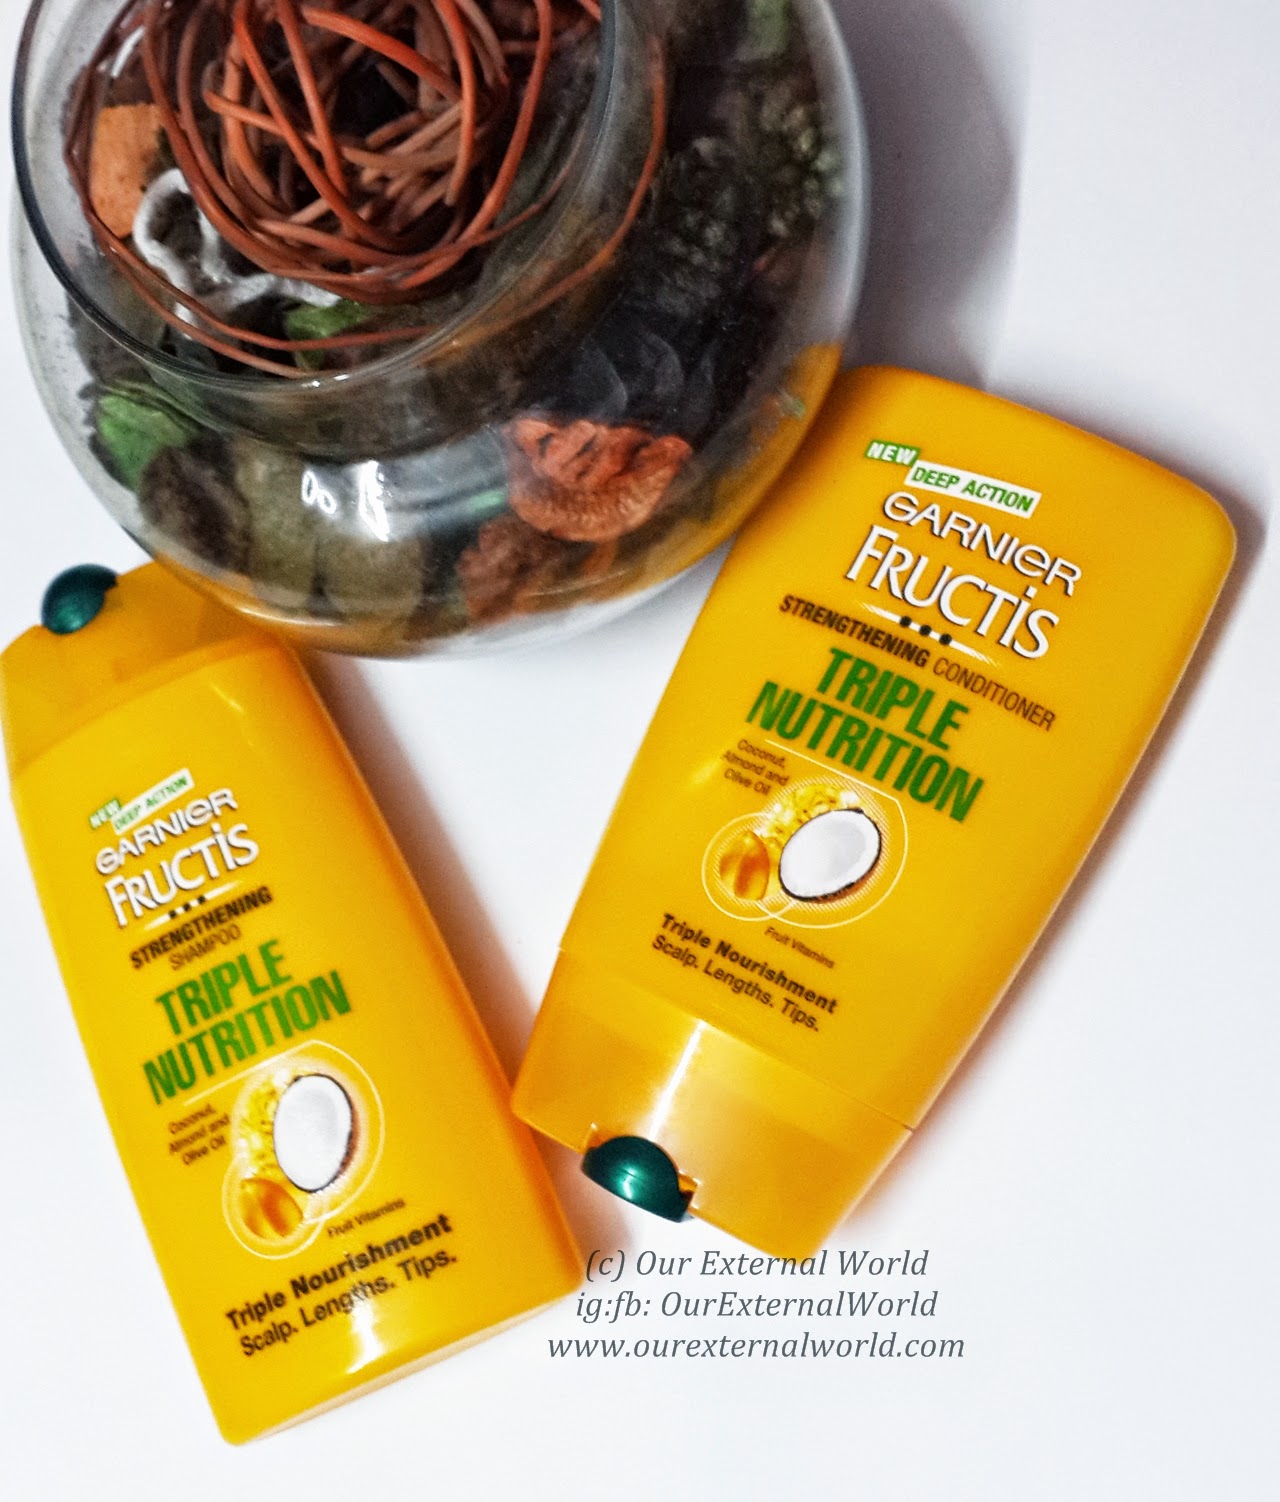 My Hair Story - The Strong And Smooth Hair Challenge, garnier fructis triple nutrition